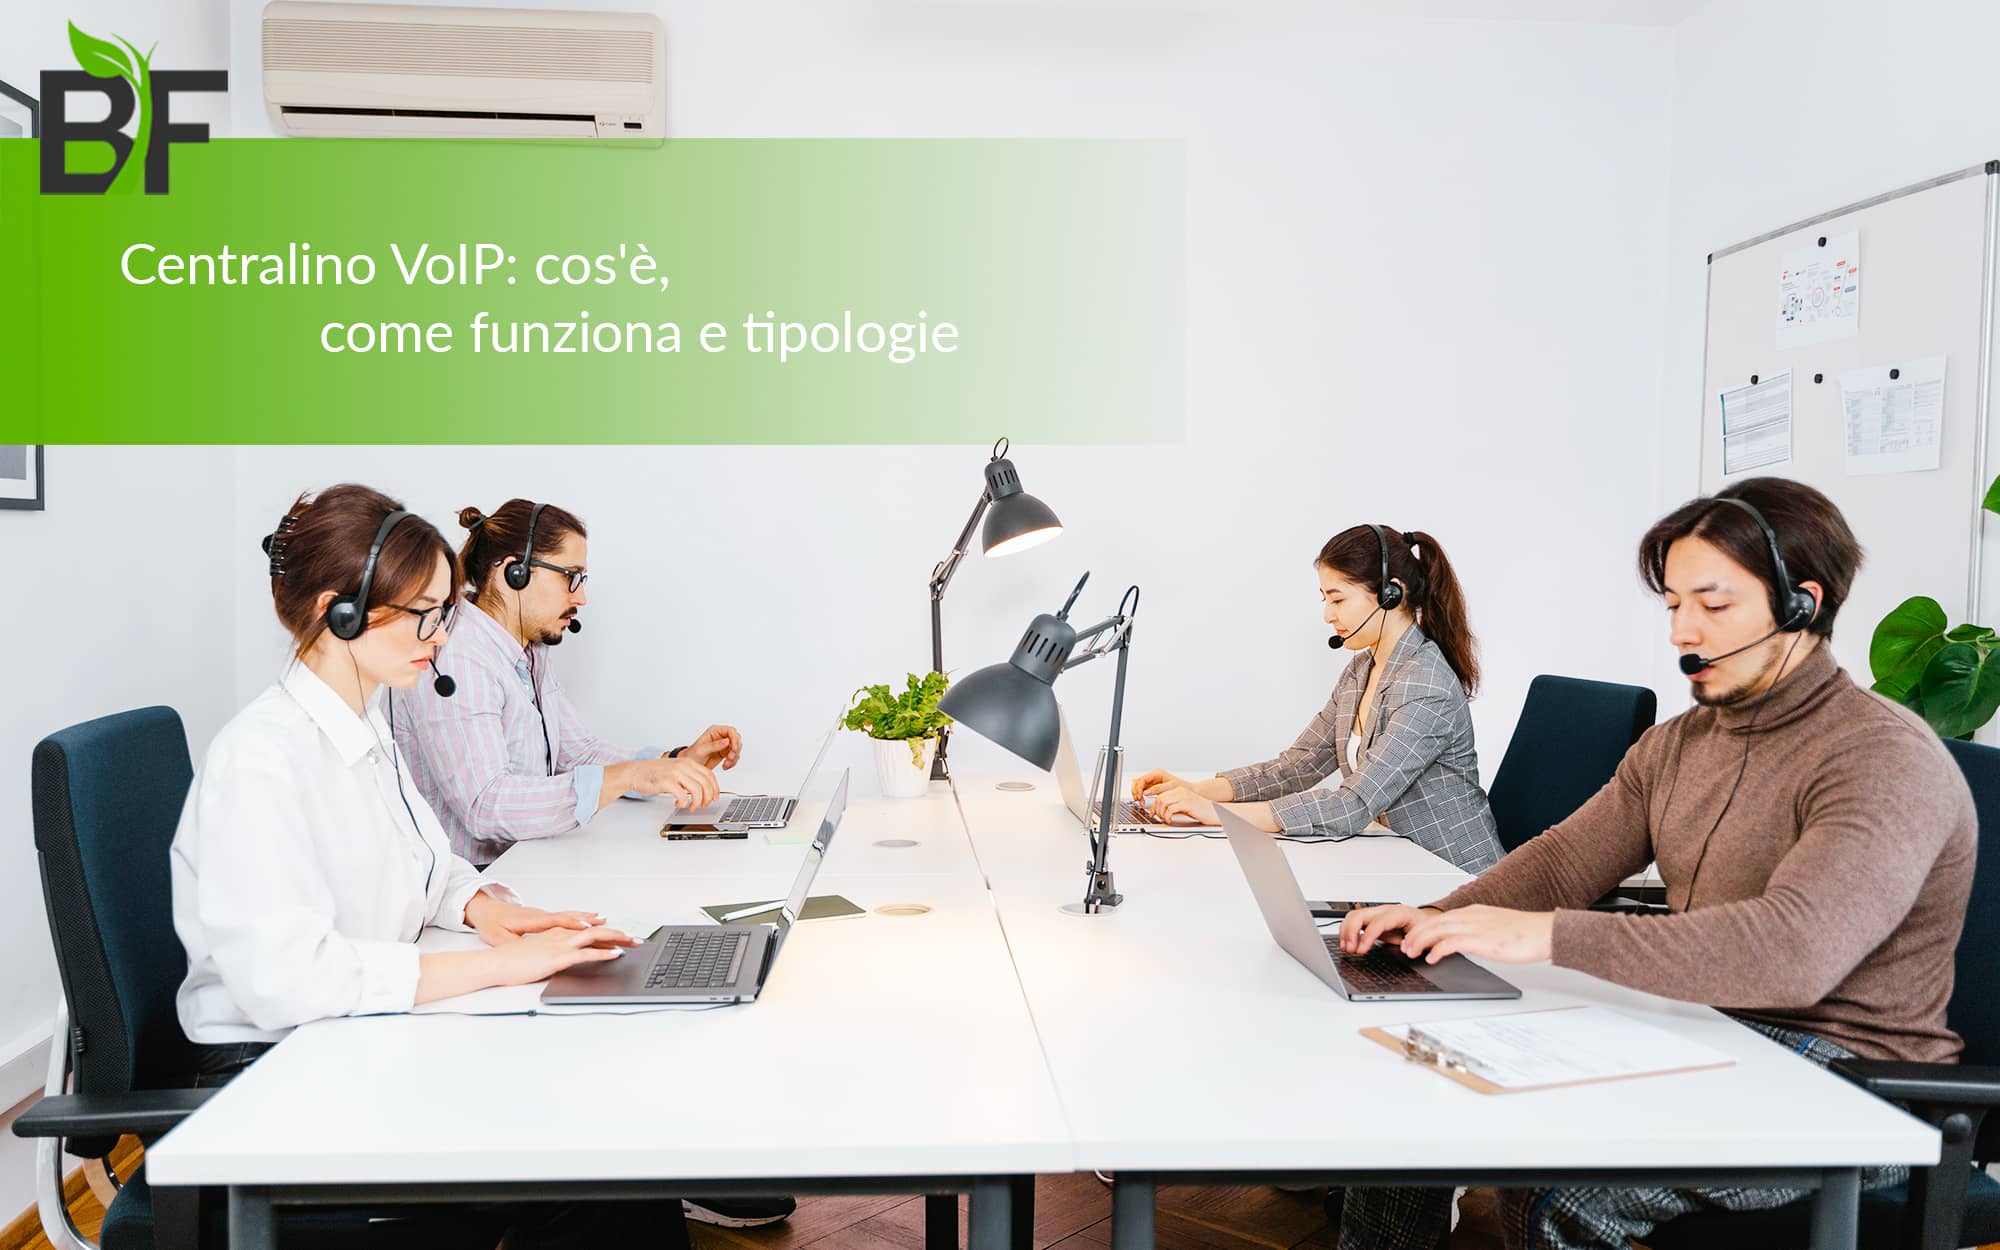 centralino-voip-cos-è-come-funziona-tipologie (1)